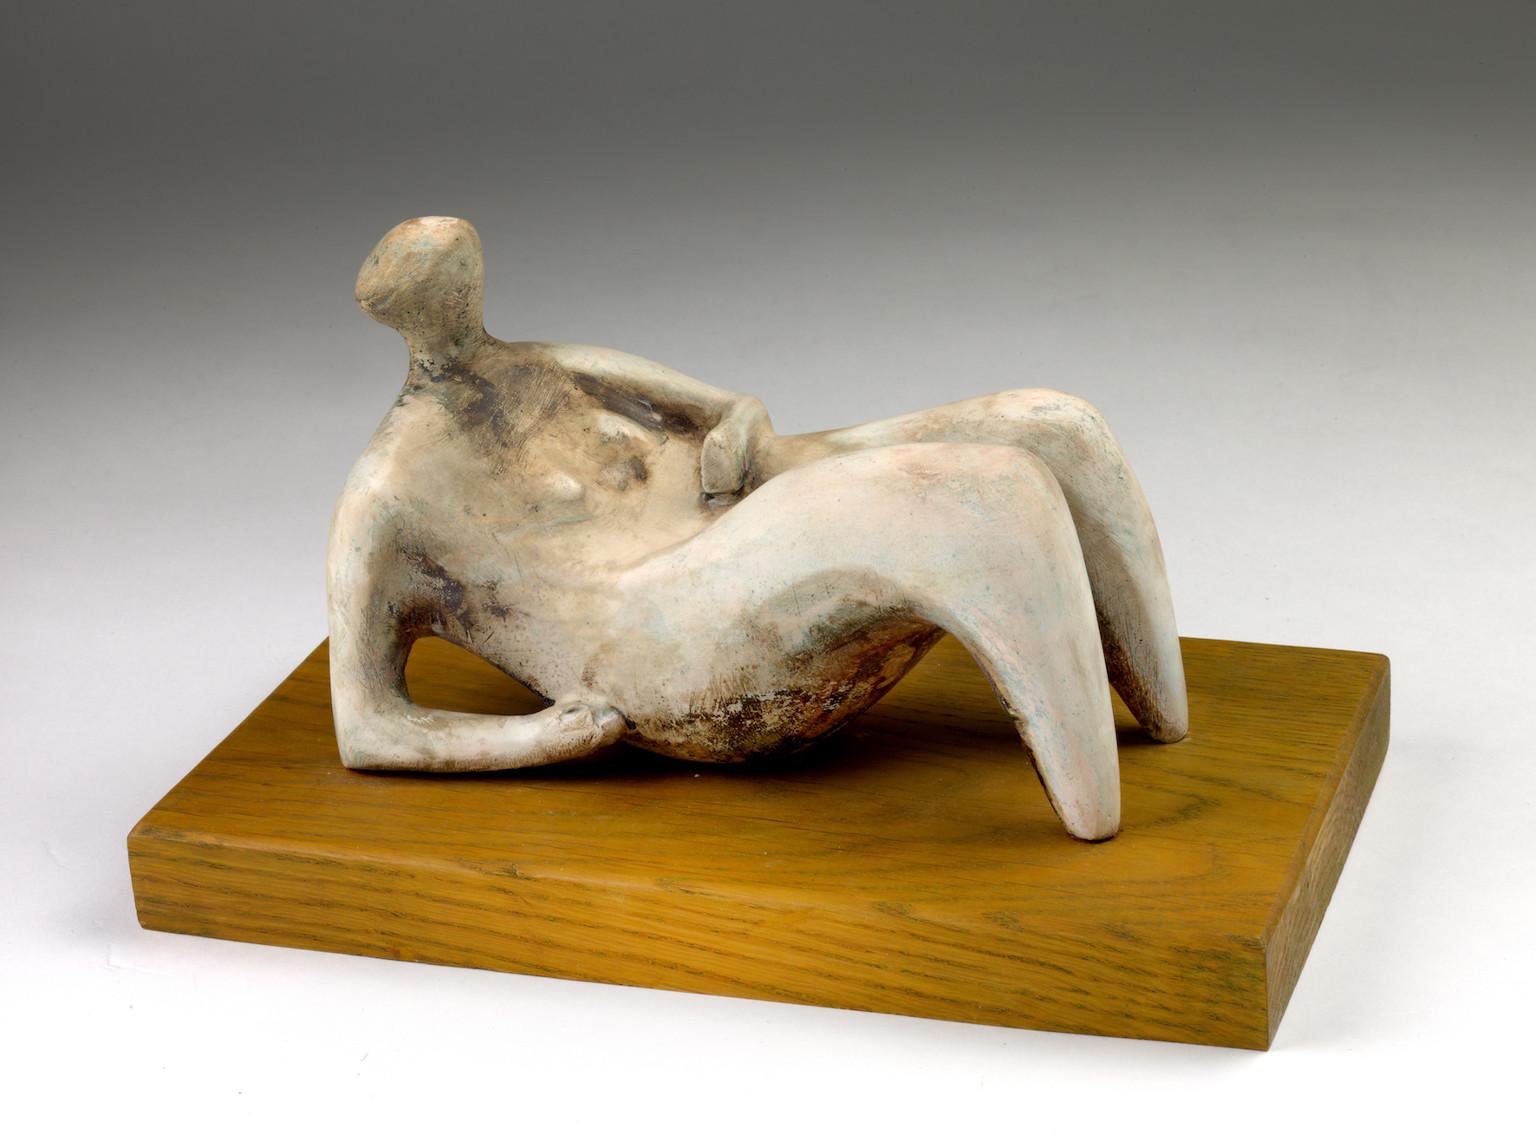 Reclining Nude - Sculpture by Henry Moore